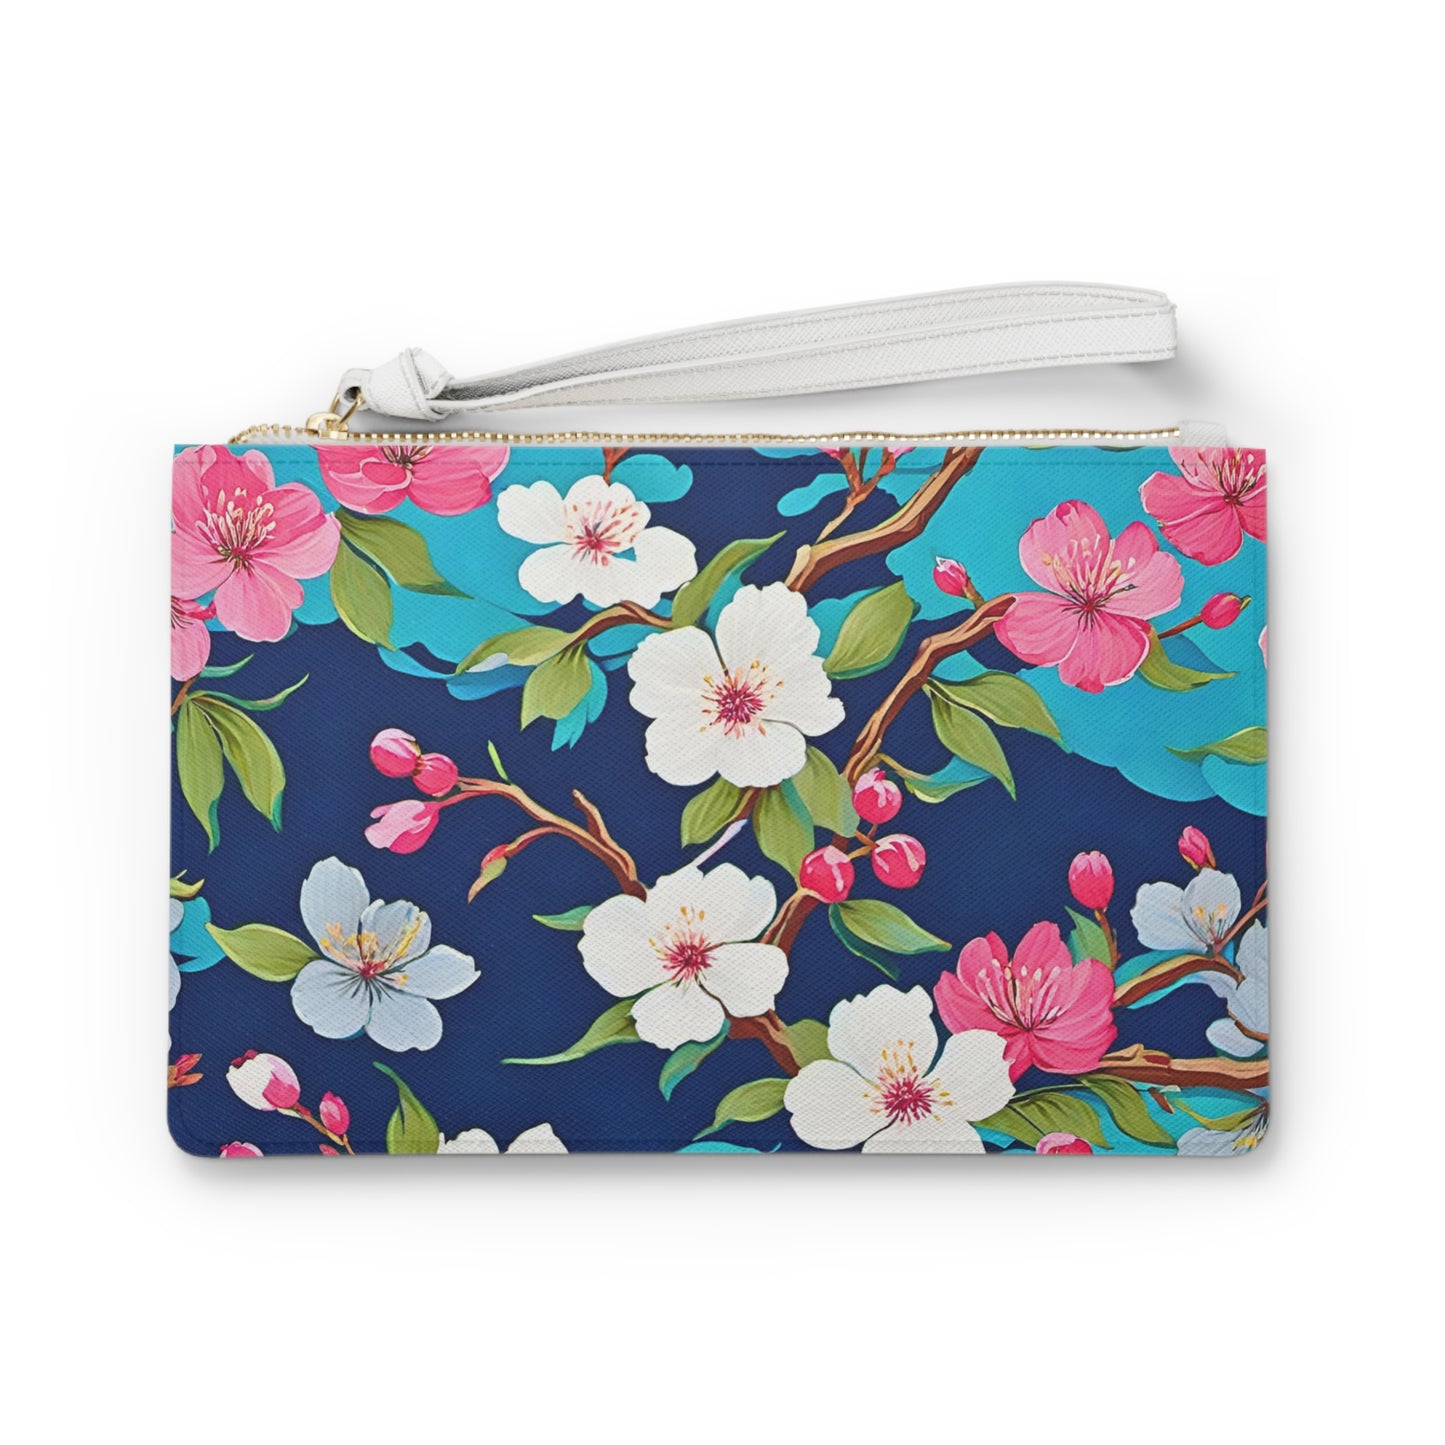 Cherry Blossoms Japanese Floral Branches White Pink Errands Evening Pouch Clutch Bag